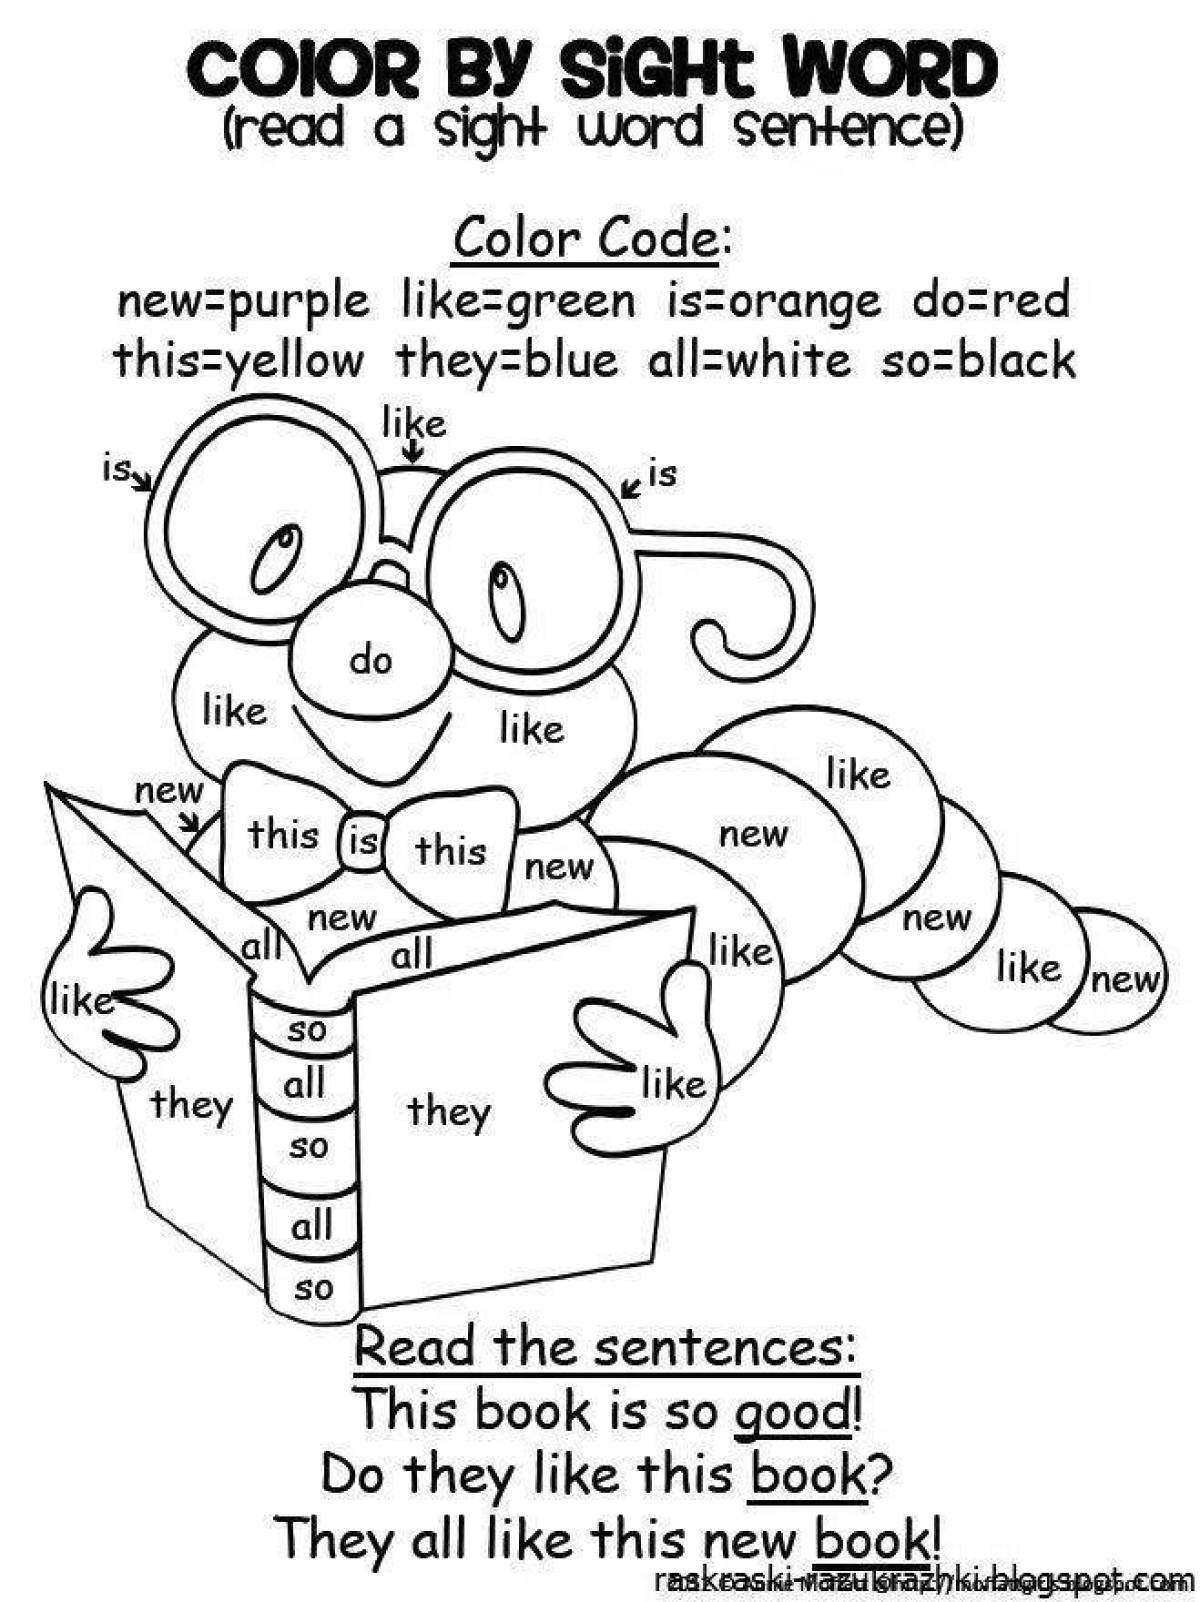 Bright coloring page translation